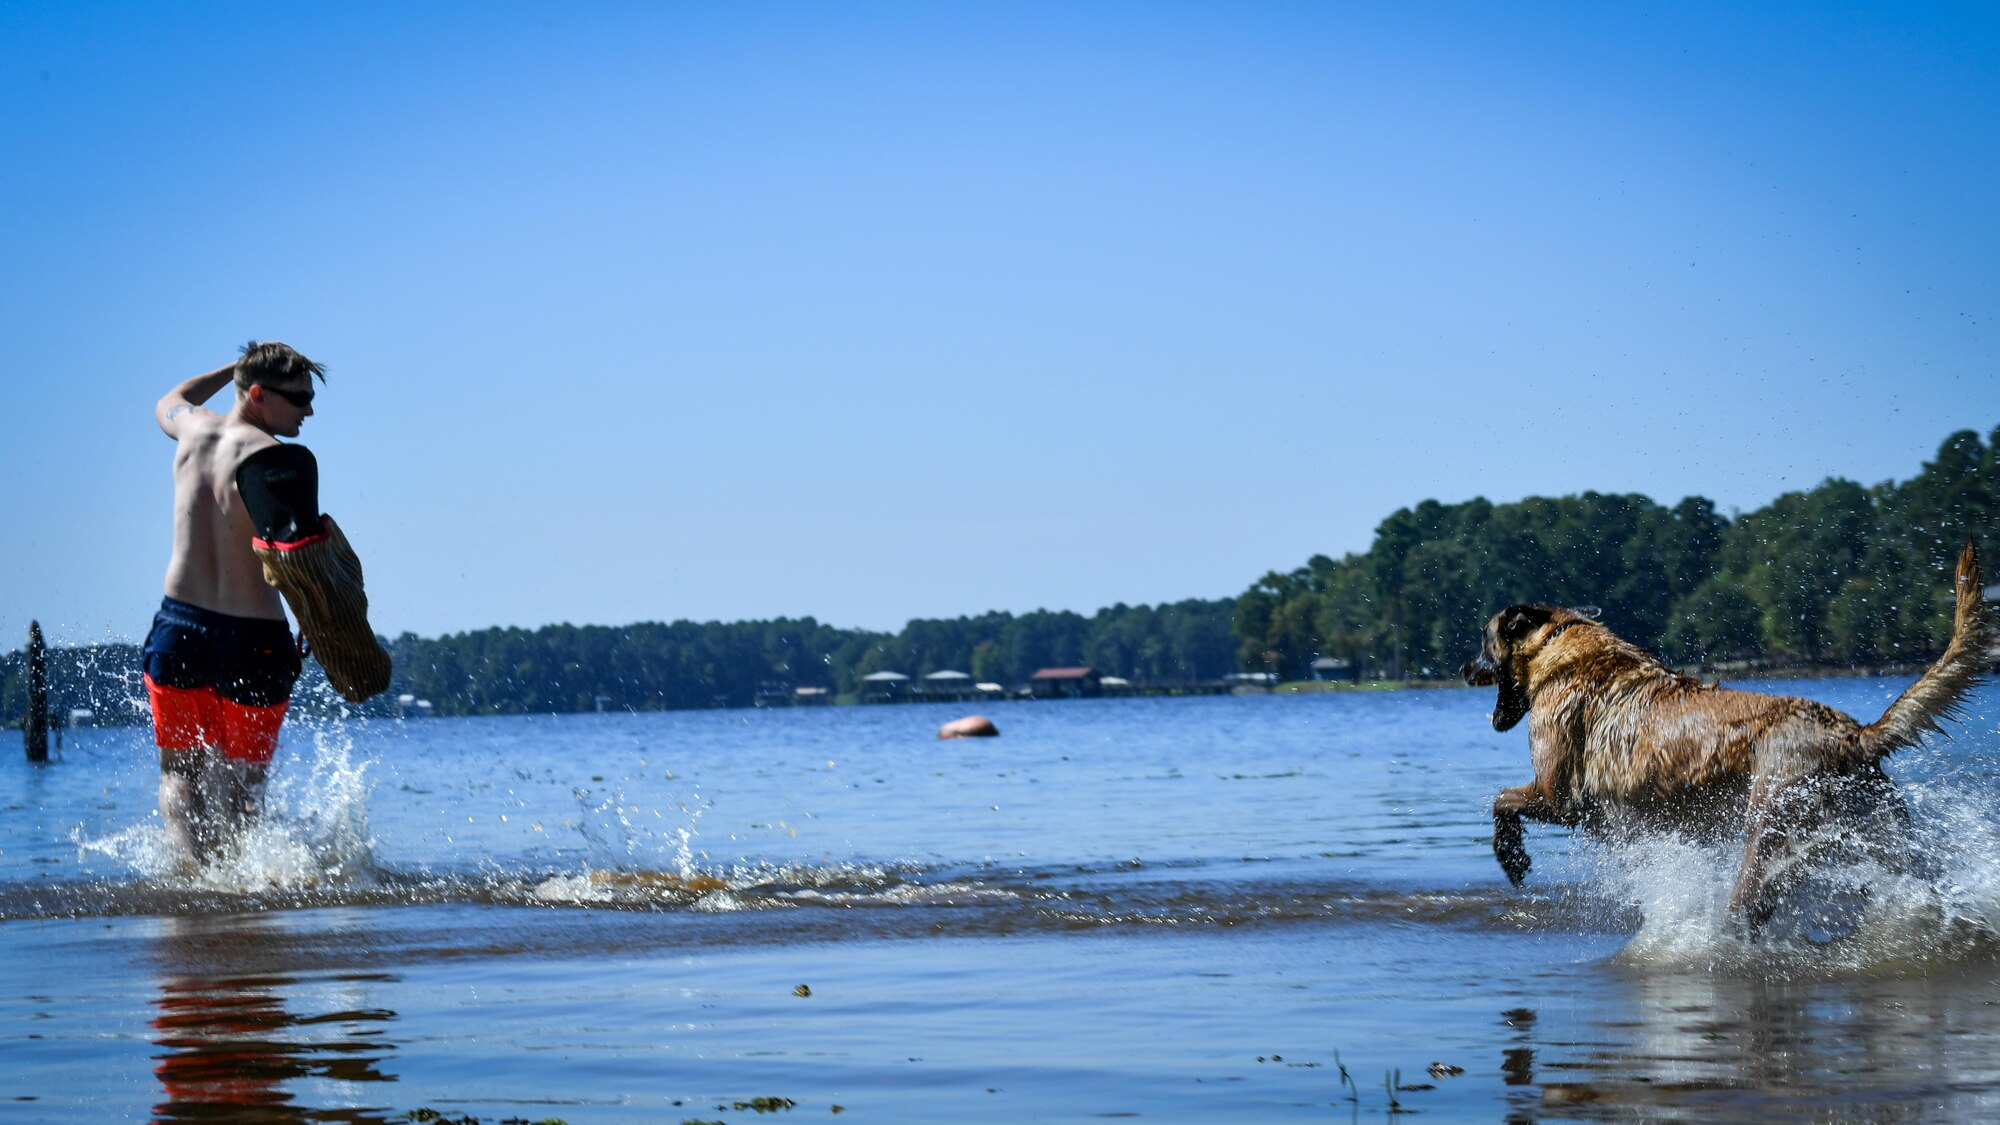 Senior Airman William Sims, 2nd Security Forces Squadron military working dog handler, attempts to evade MWD Zzeki during a water aggression training session at Black Bayou Lake in Benton, La., Sept. 6, 2017. Sims ran into the lake in an attempt to confuse and evade MWD Zzeki